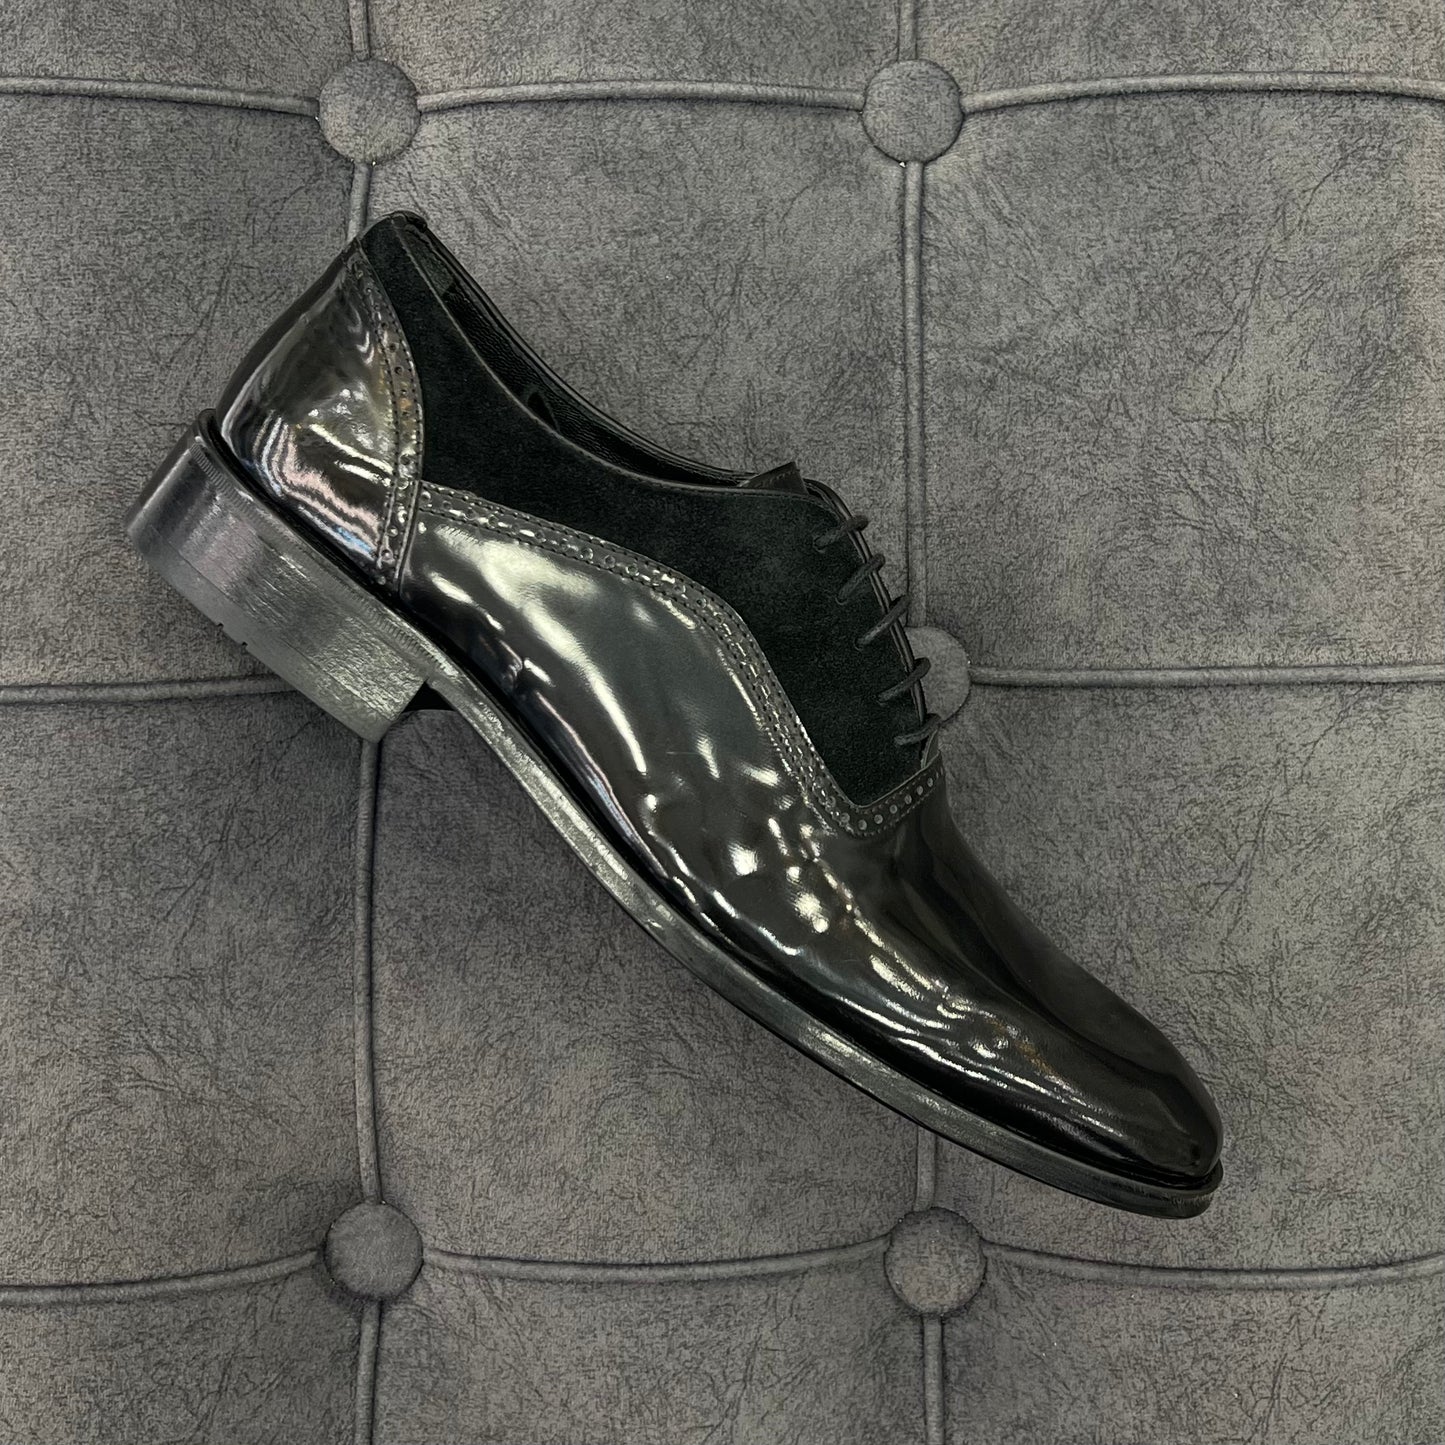 Aronay Turkish classic shoes for men in shiny black